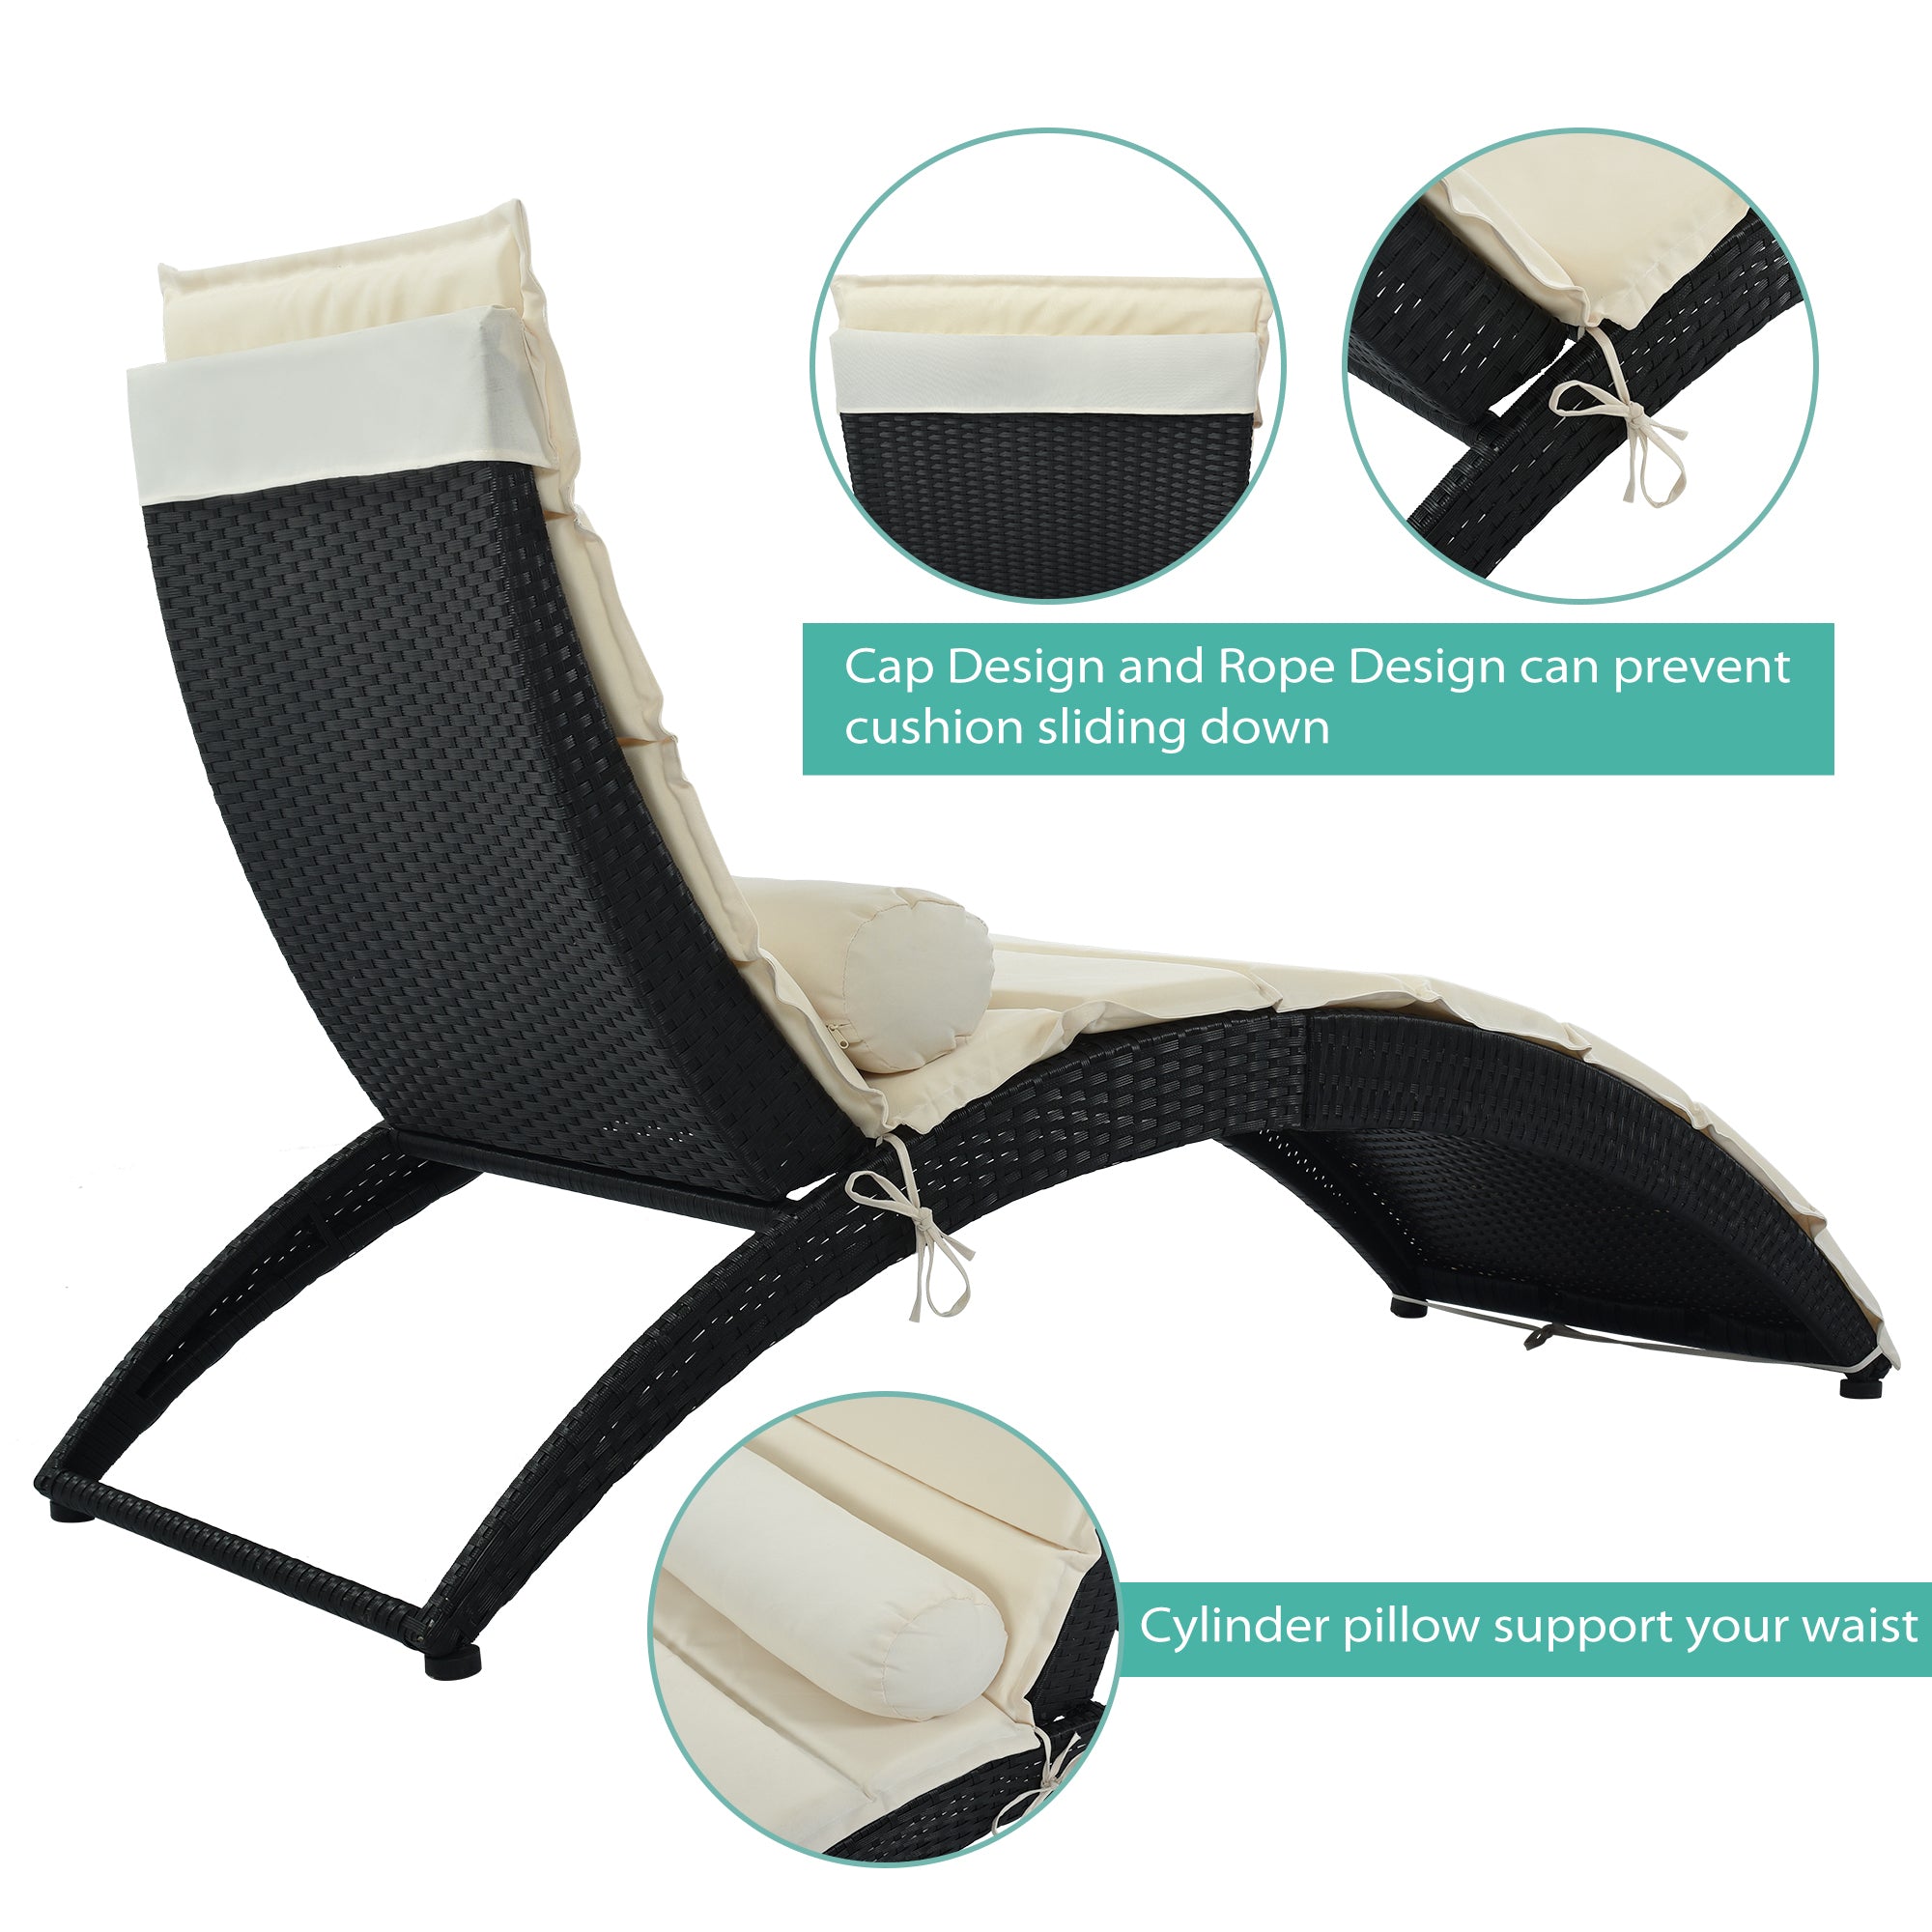 Patio Wicker Foldable Chaise Lounger with Removable Cushion and Bolster Pillow, Black Wicker and Beige Cushion